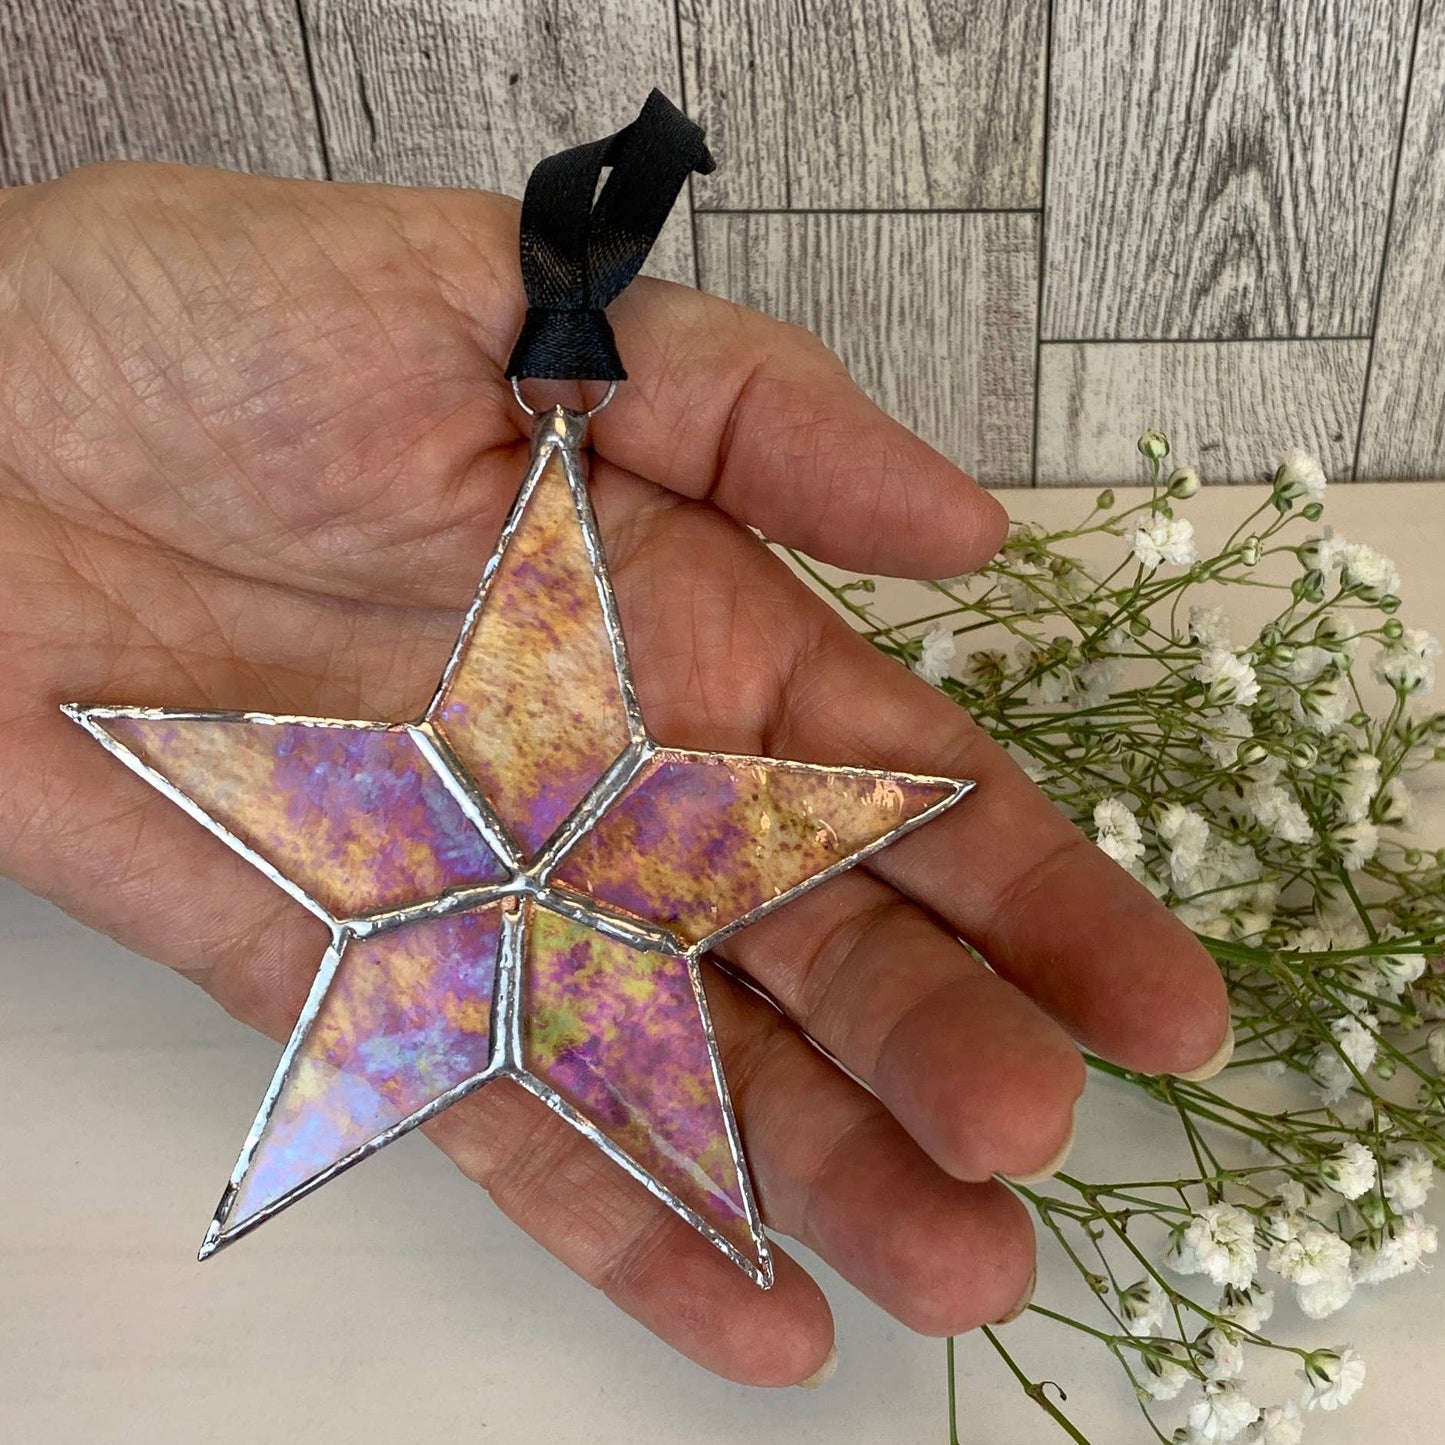 You + Shine: Warrior Handmade Stained Glass Star Ornament